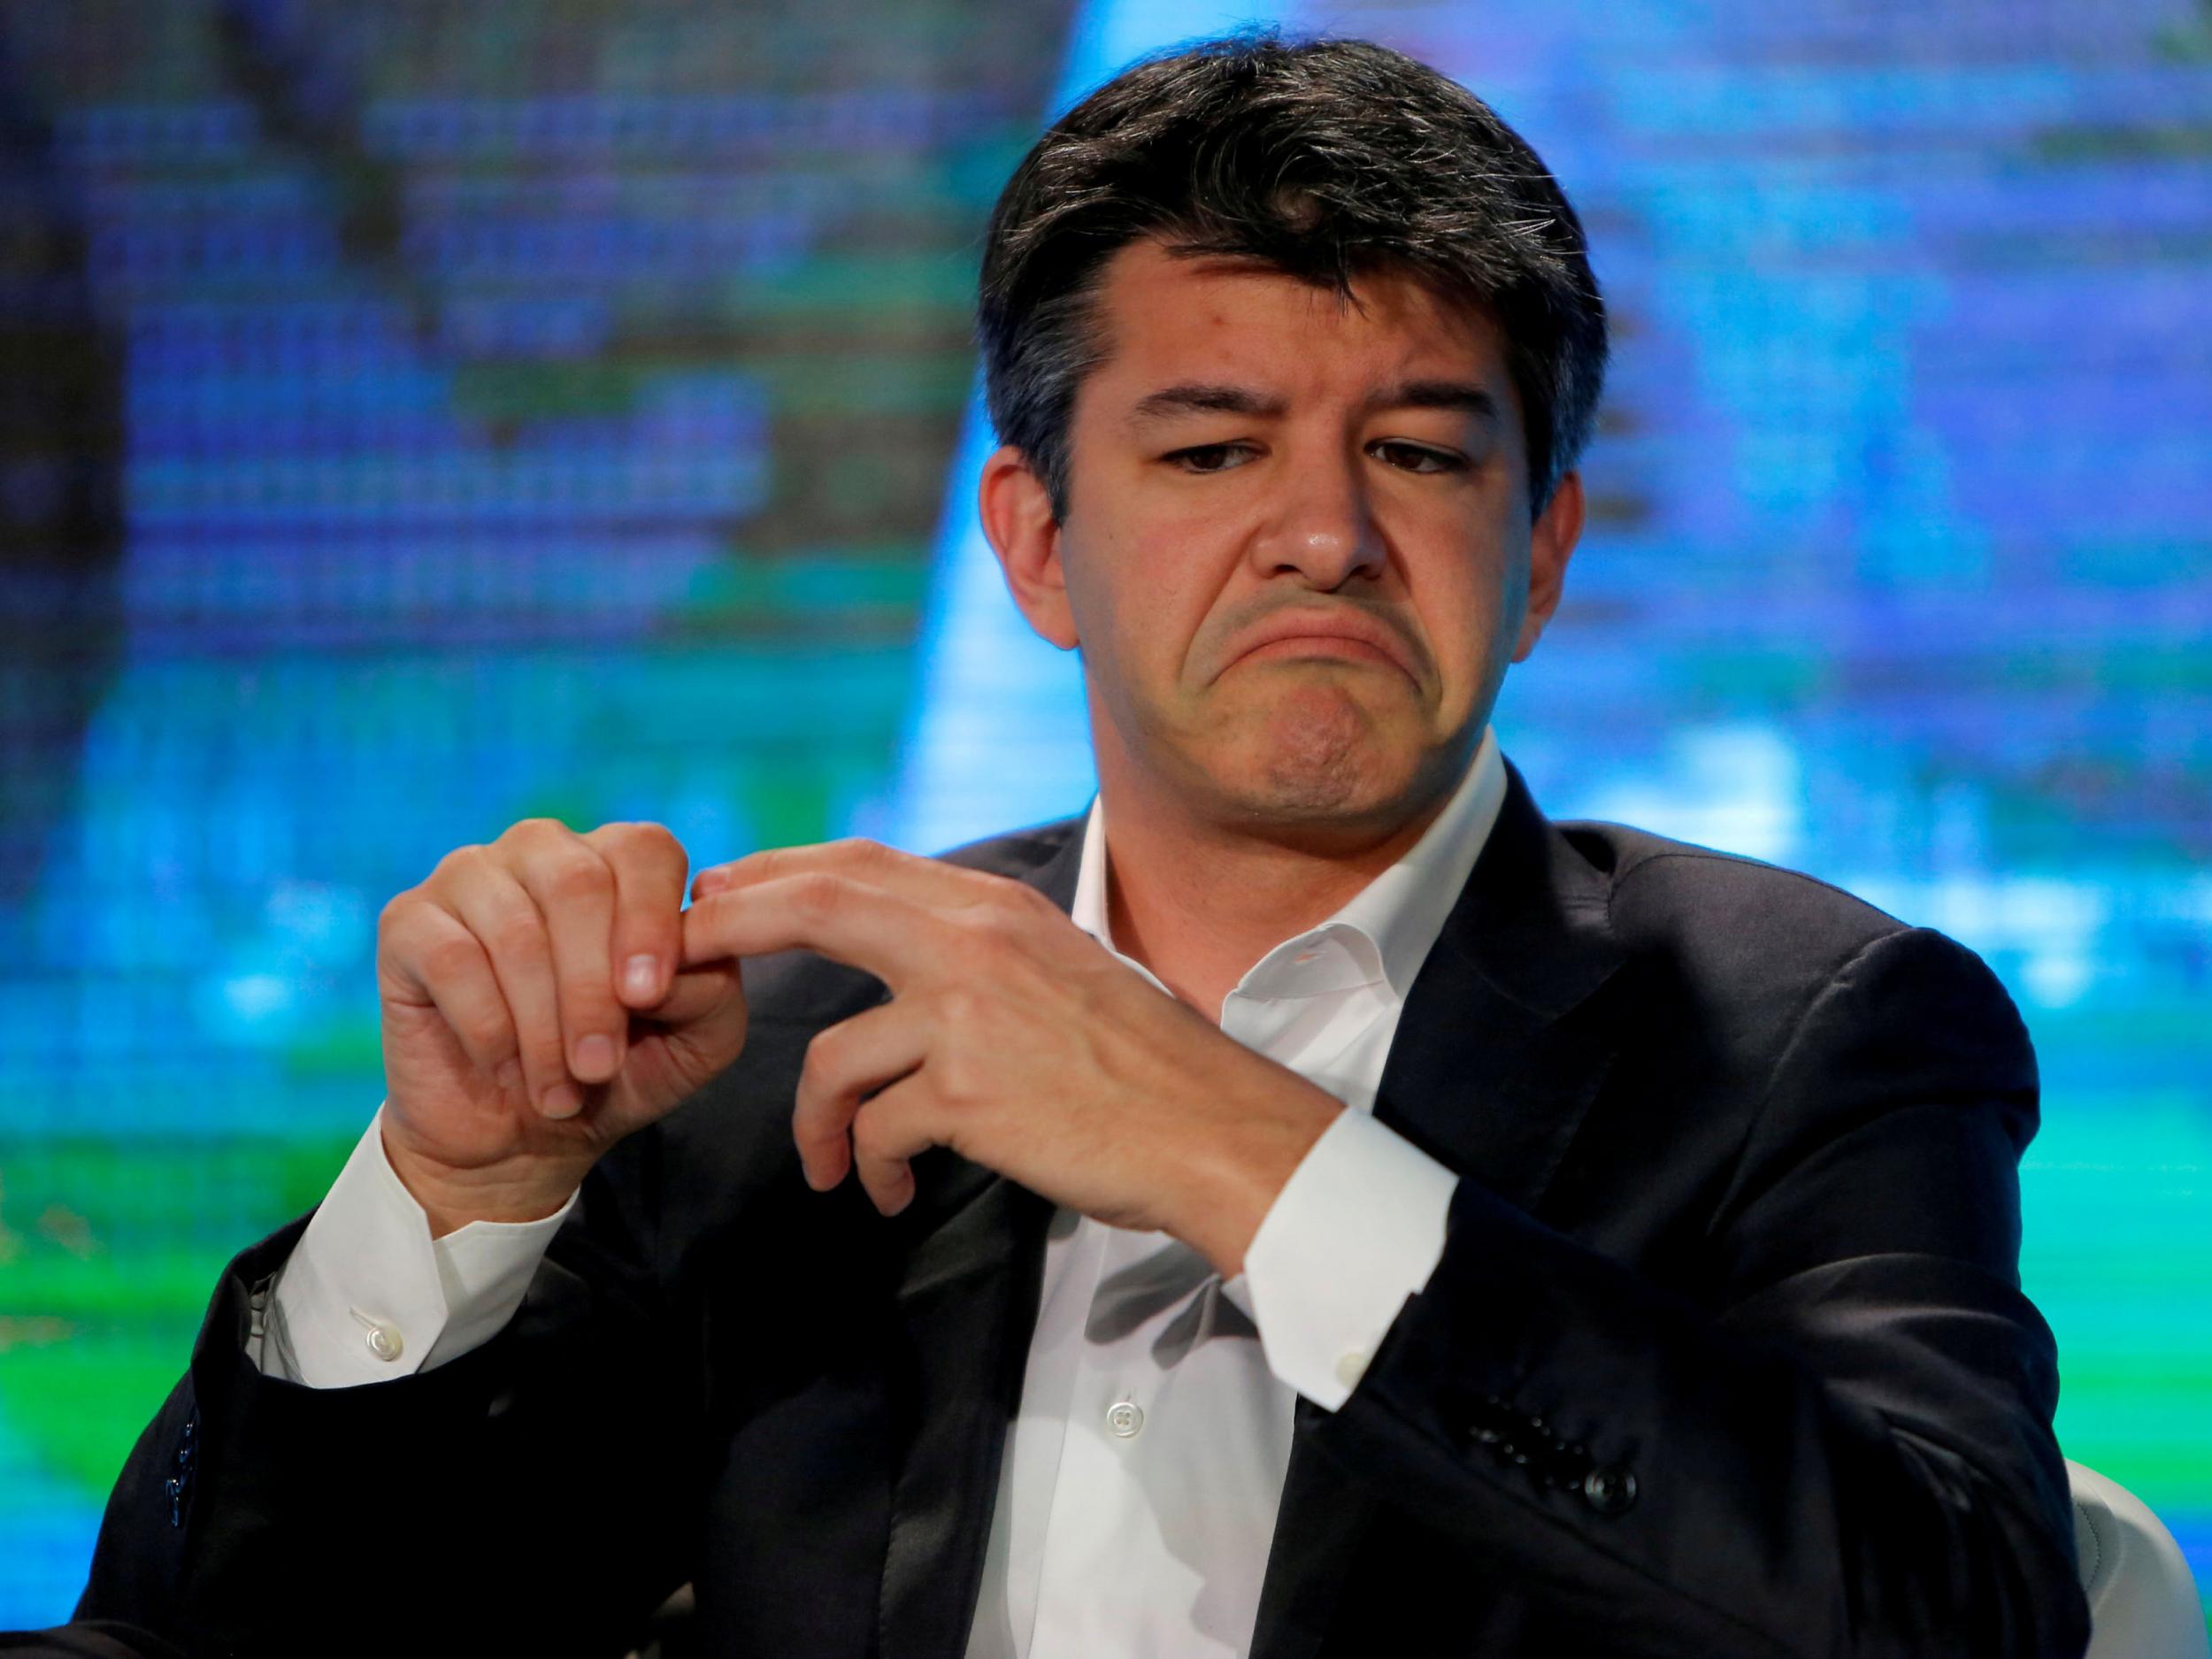 Travis Kalanick’s decision without warning to name two board members late Friday afternoon has put him at odds with his successor, Dara Khosrowshahi